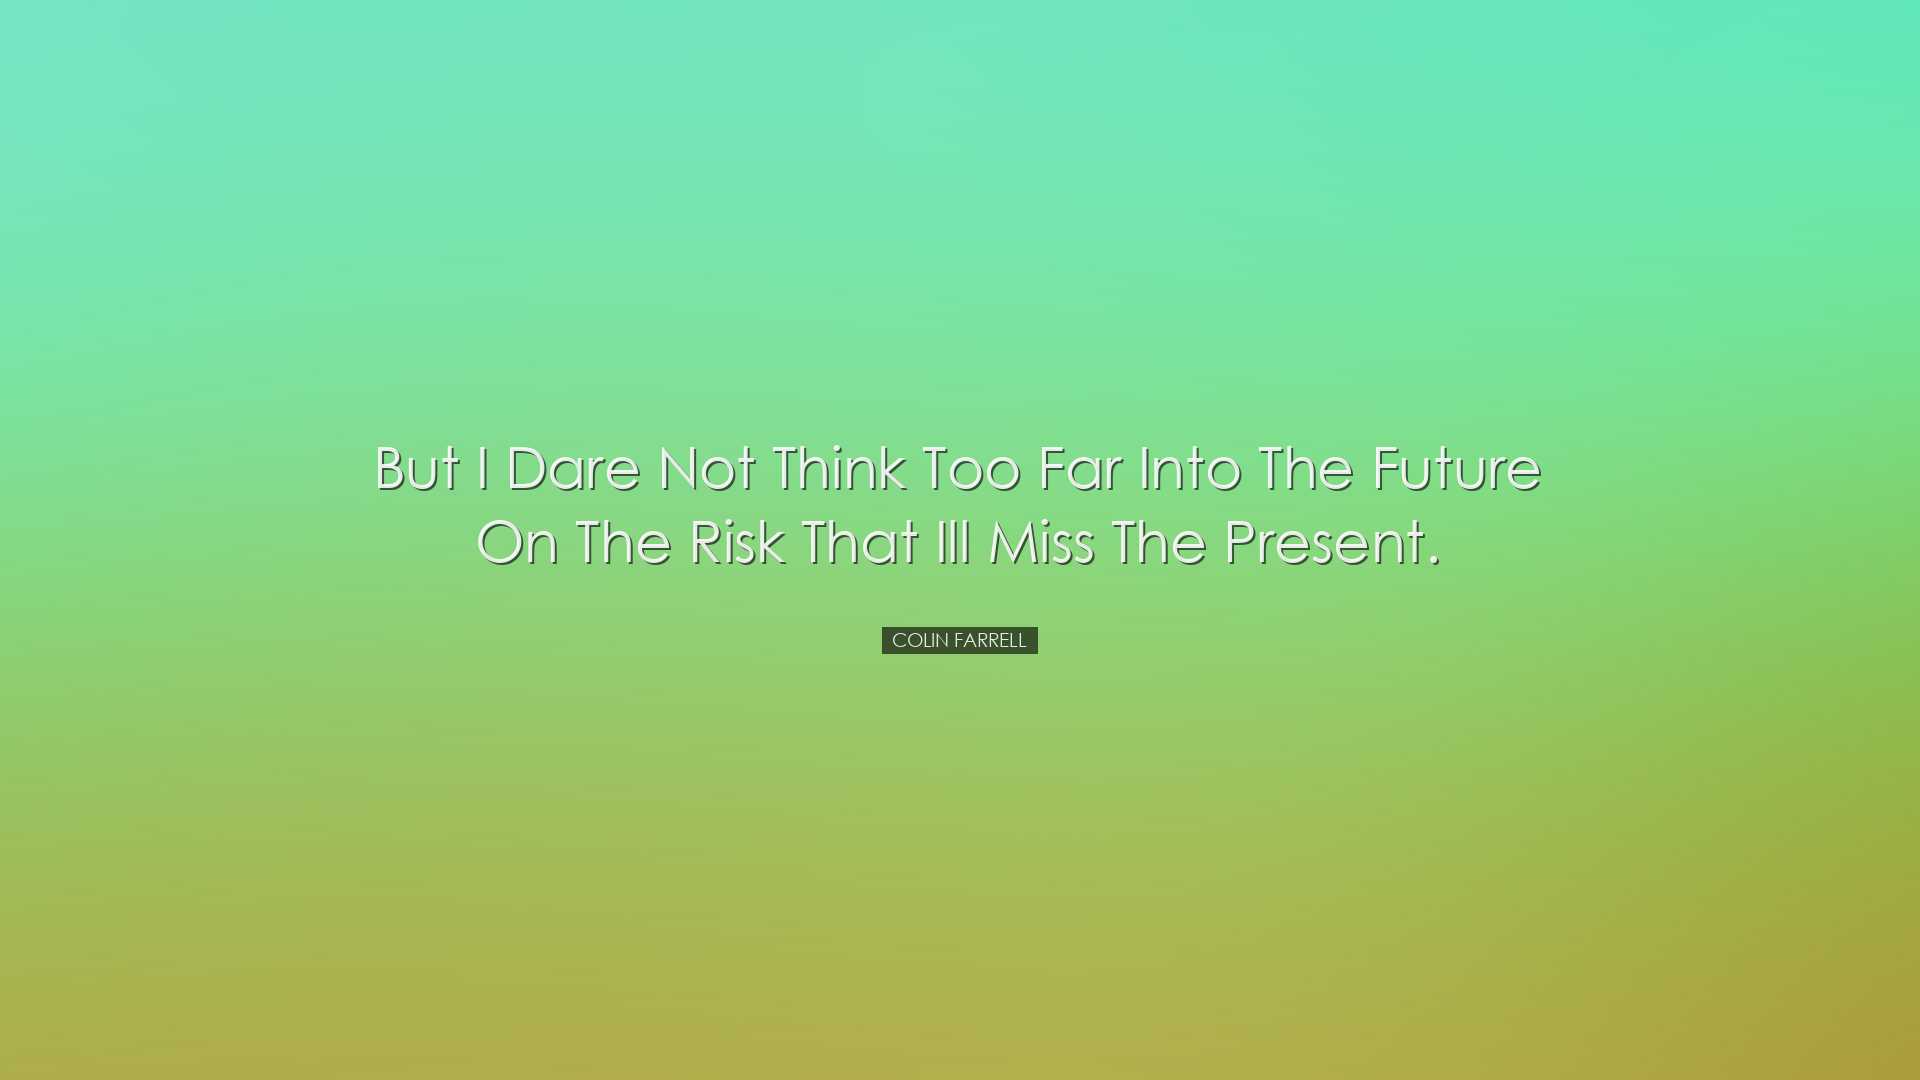 But I dare not think too far into the future on the risk that Ill